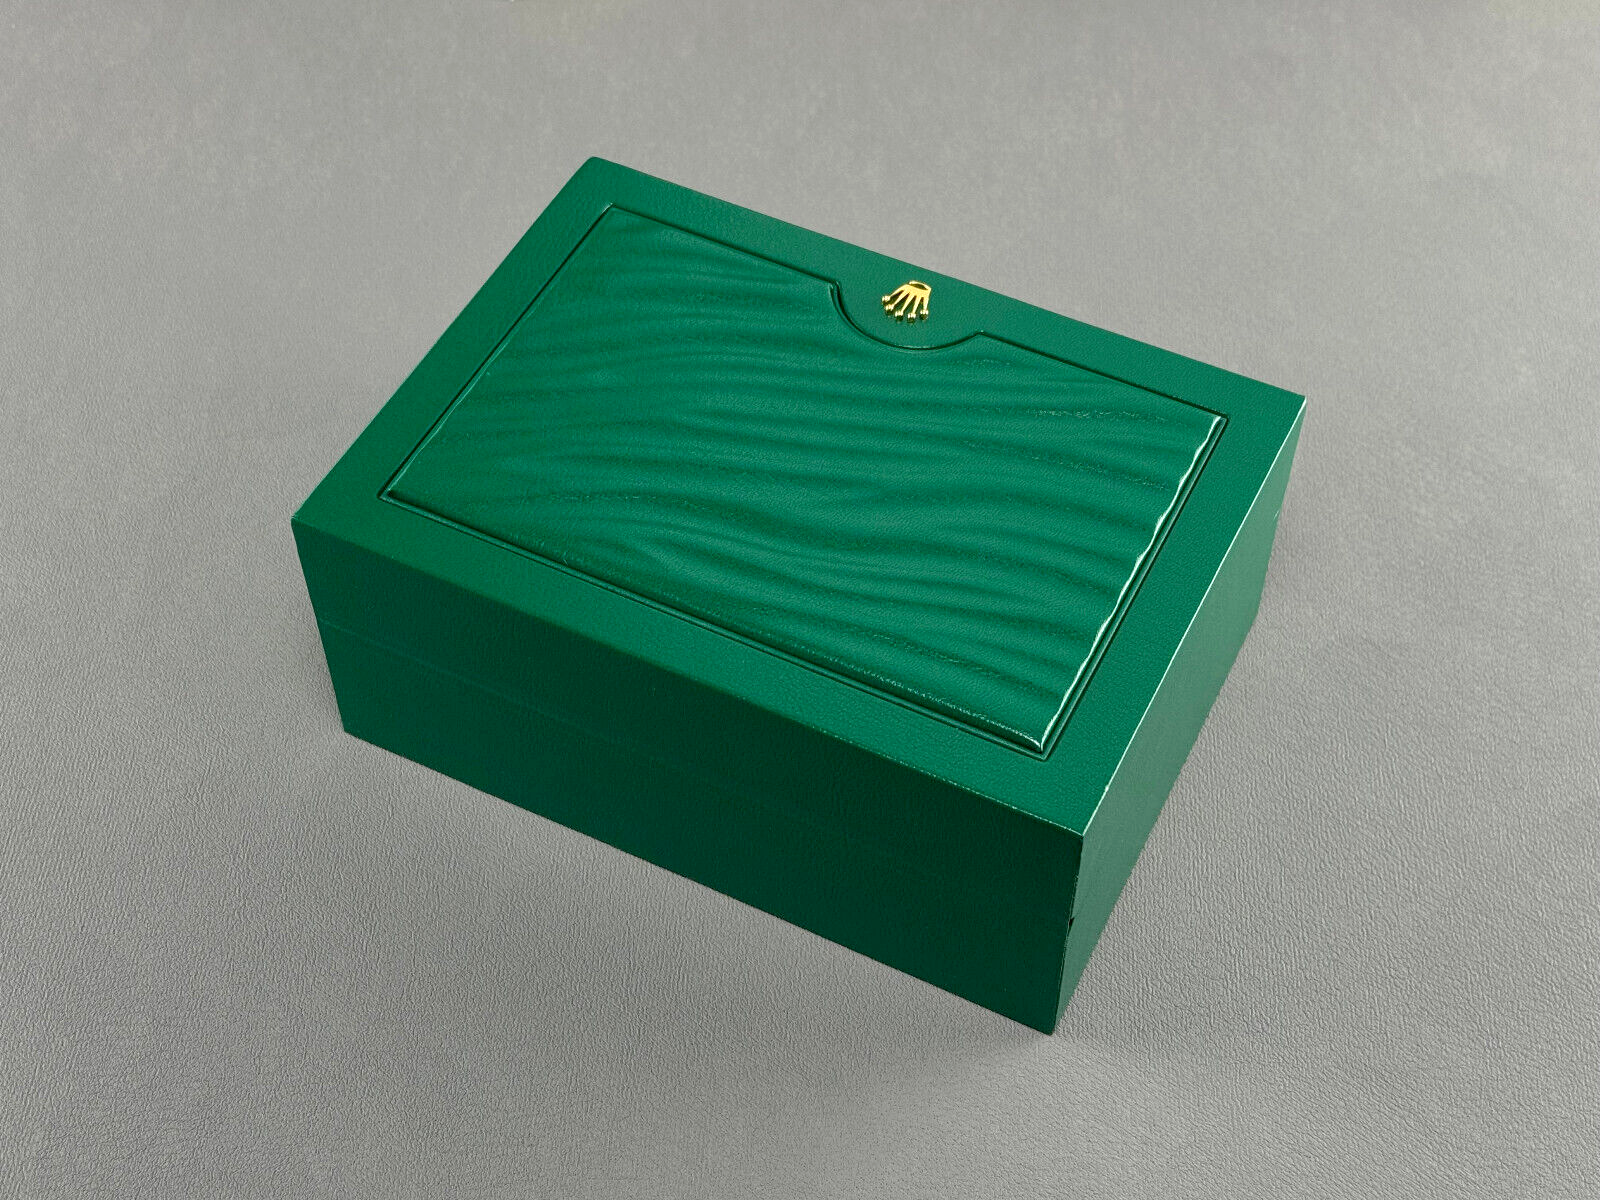 Rolex Oyster Box Size M 39139.04 